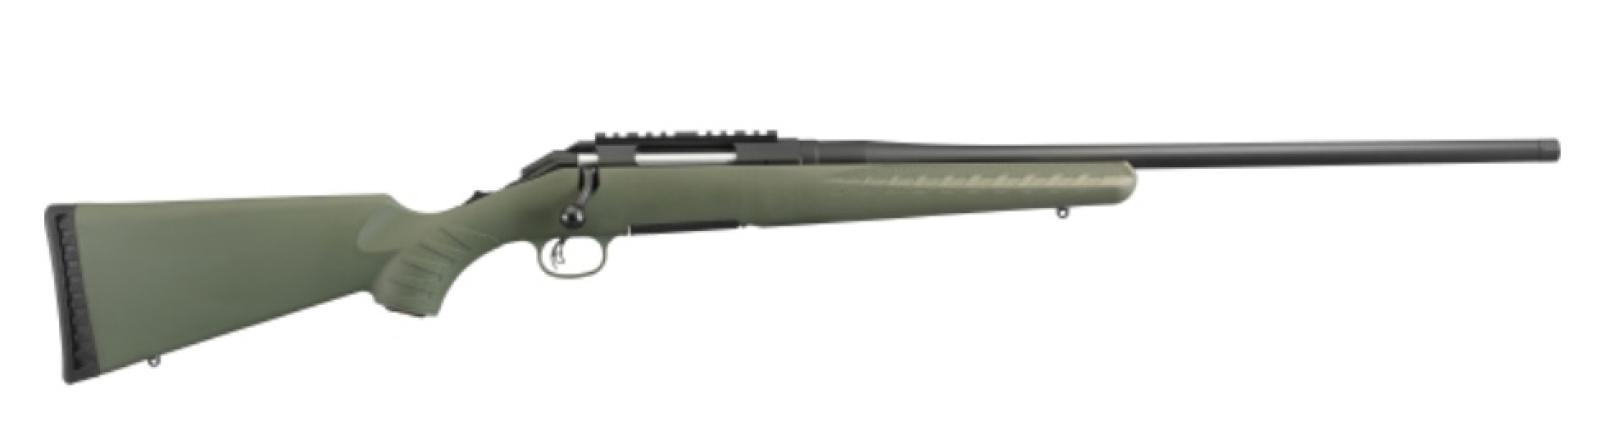 Ruger American Rifle Predator .204 Ruger Bolt-Action Rifle 